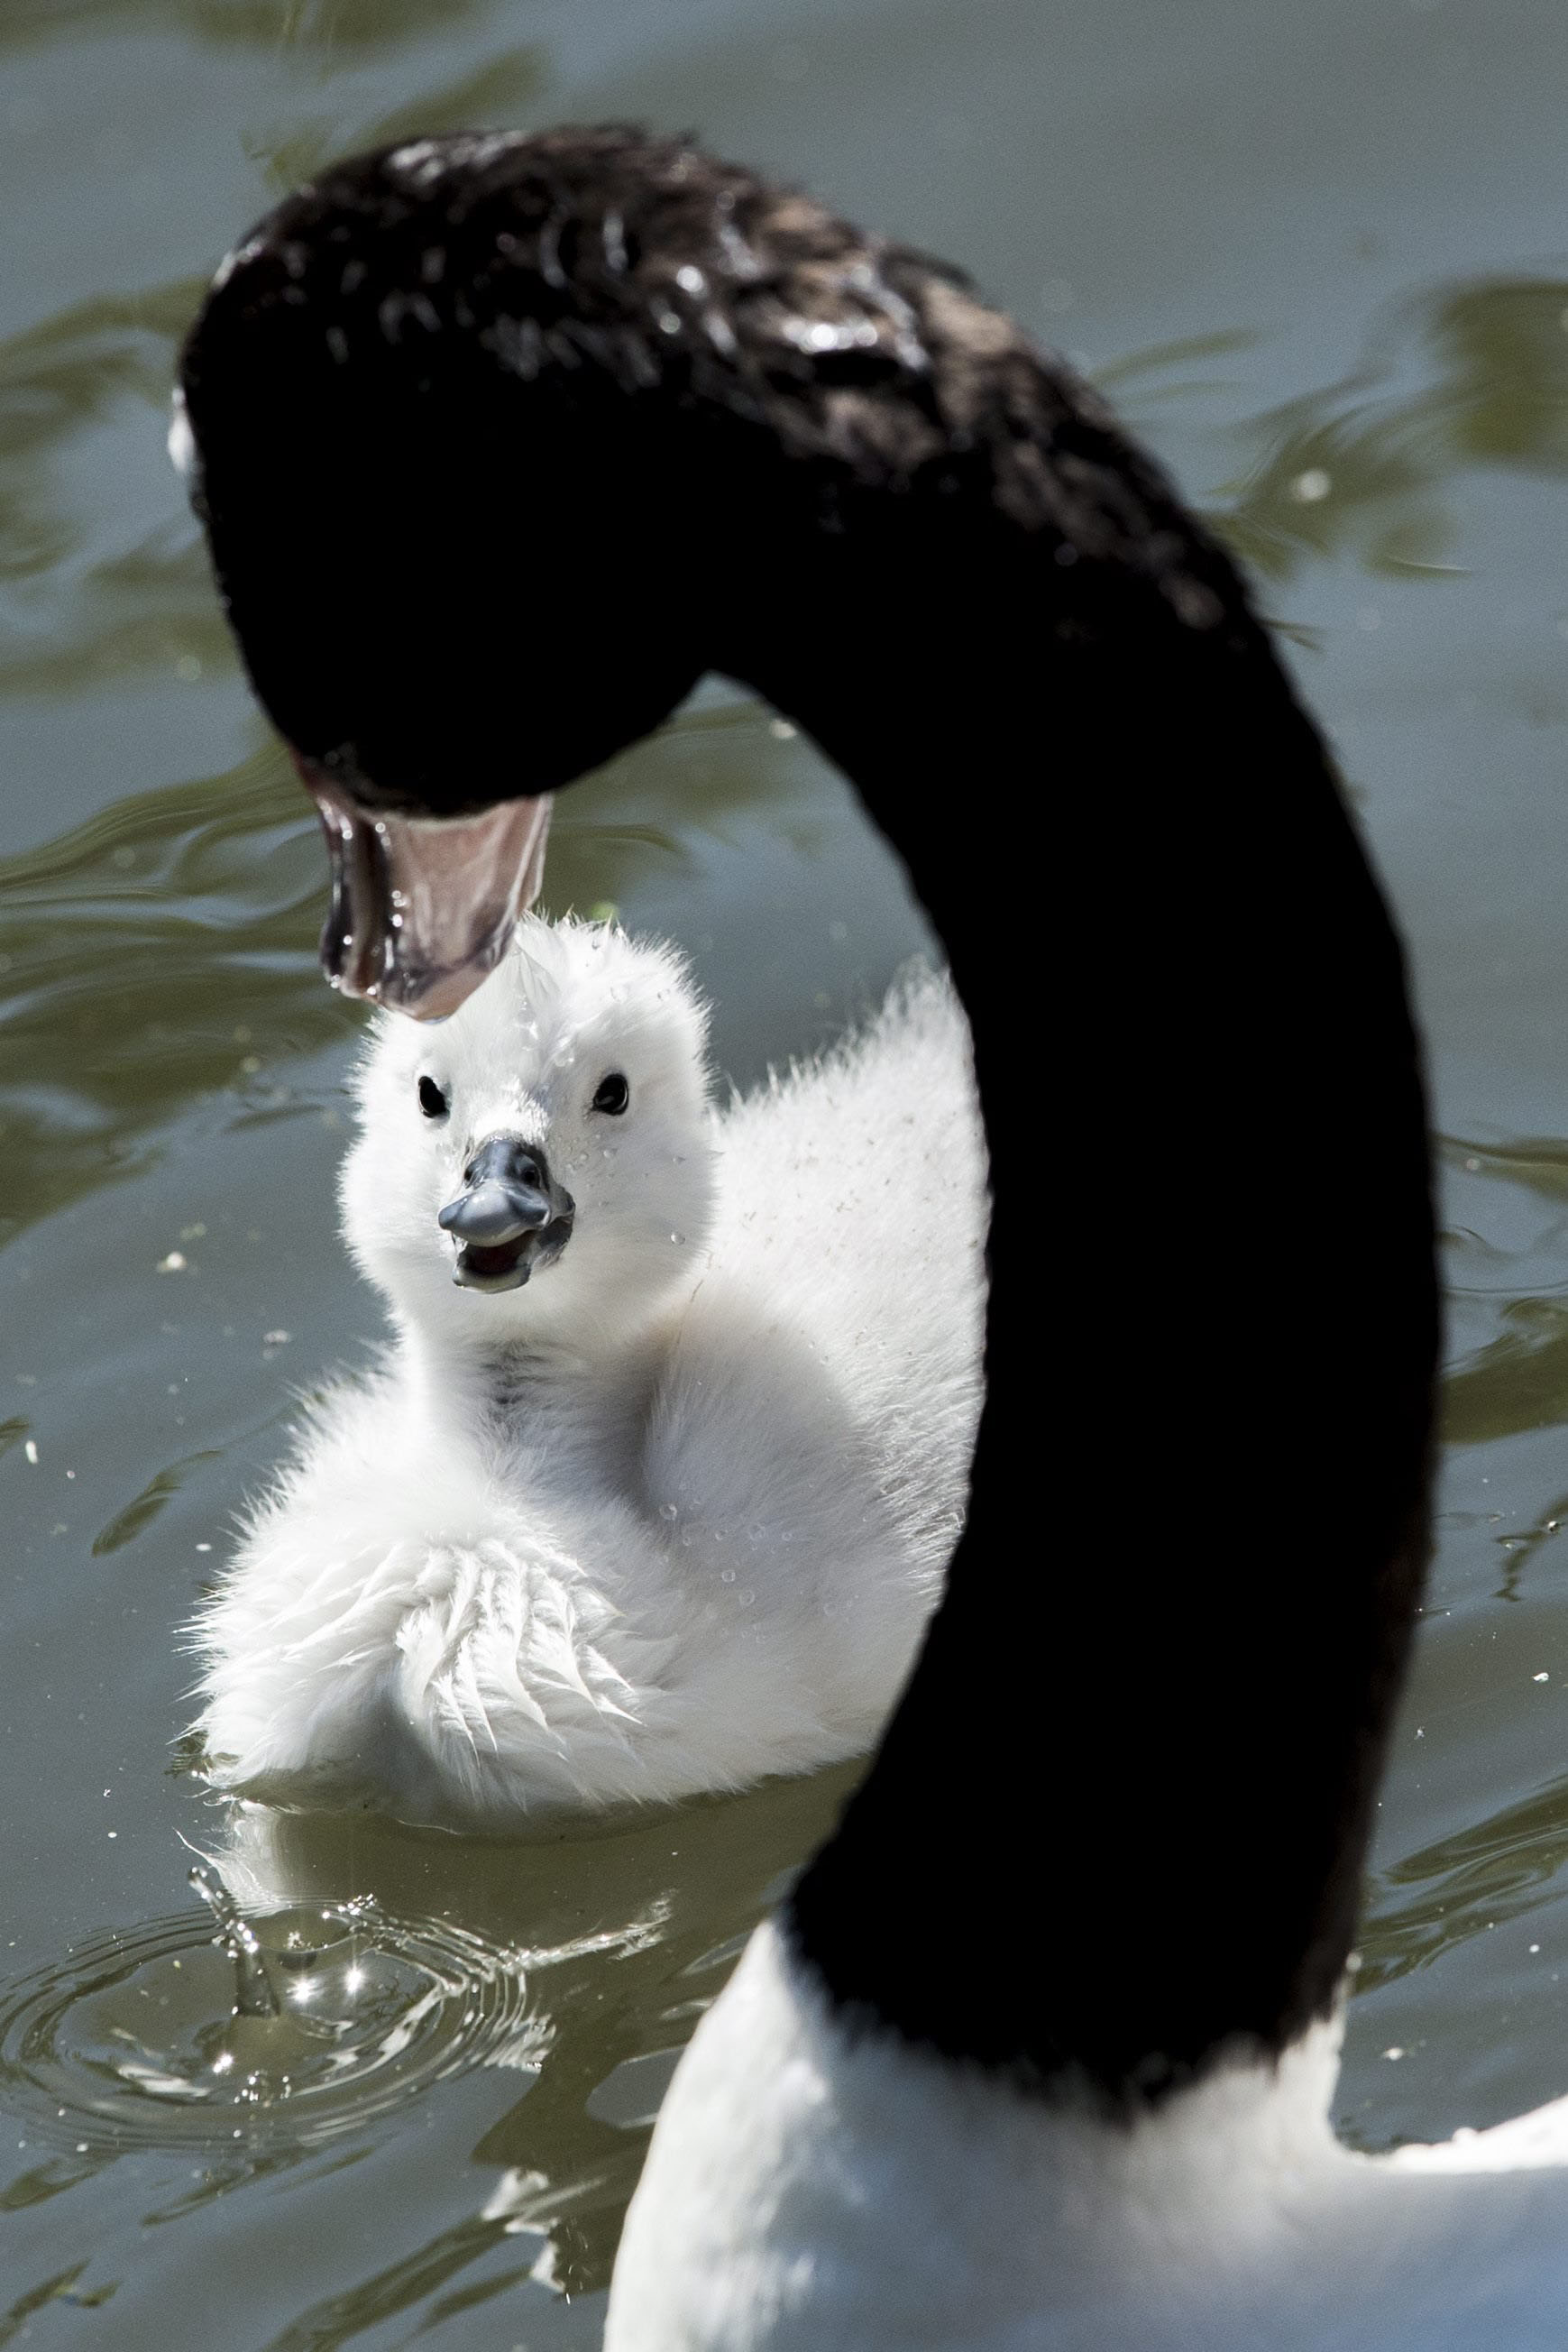 A young black-necked swan chick with its mother swim in a pond at the Zoo in Zurich, on May 21, 2014.